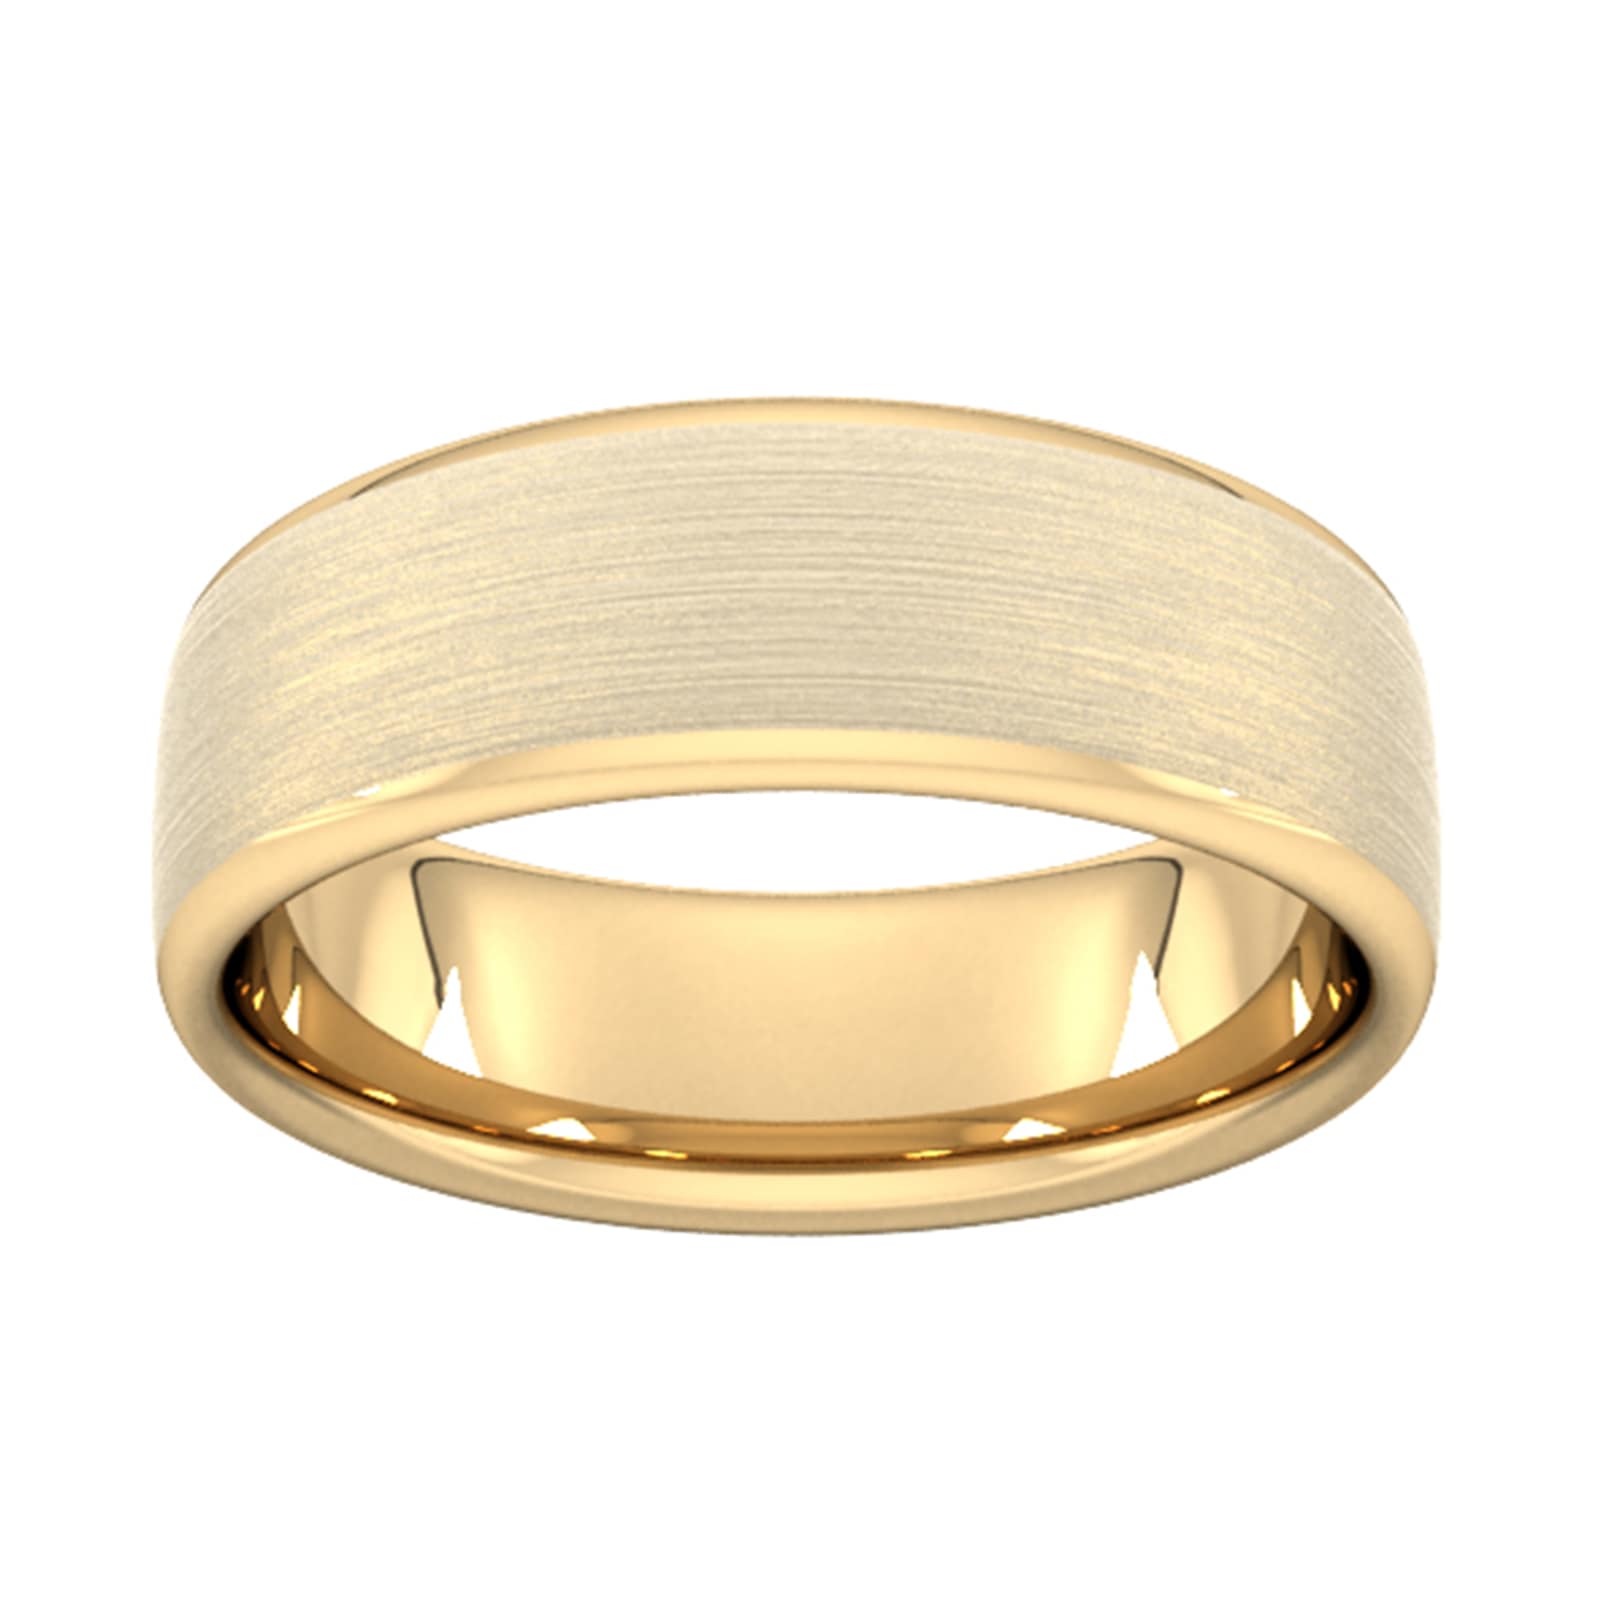 7mm D Shape Heavy Matt Finished Wedding Ring In 9 Carat Yellow Gold - Ring Size S